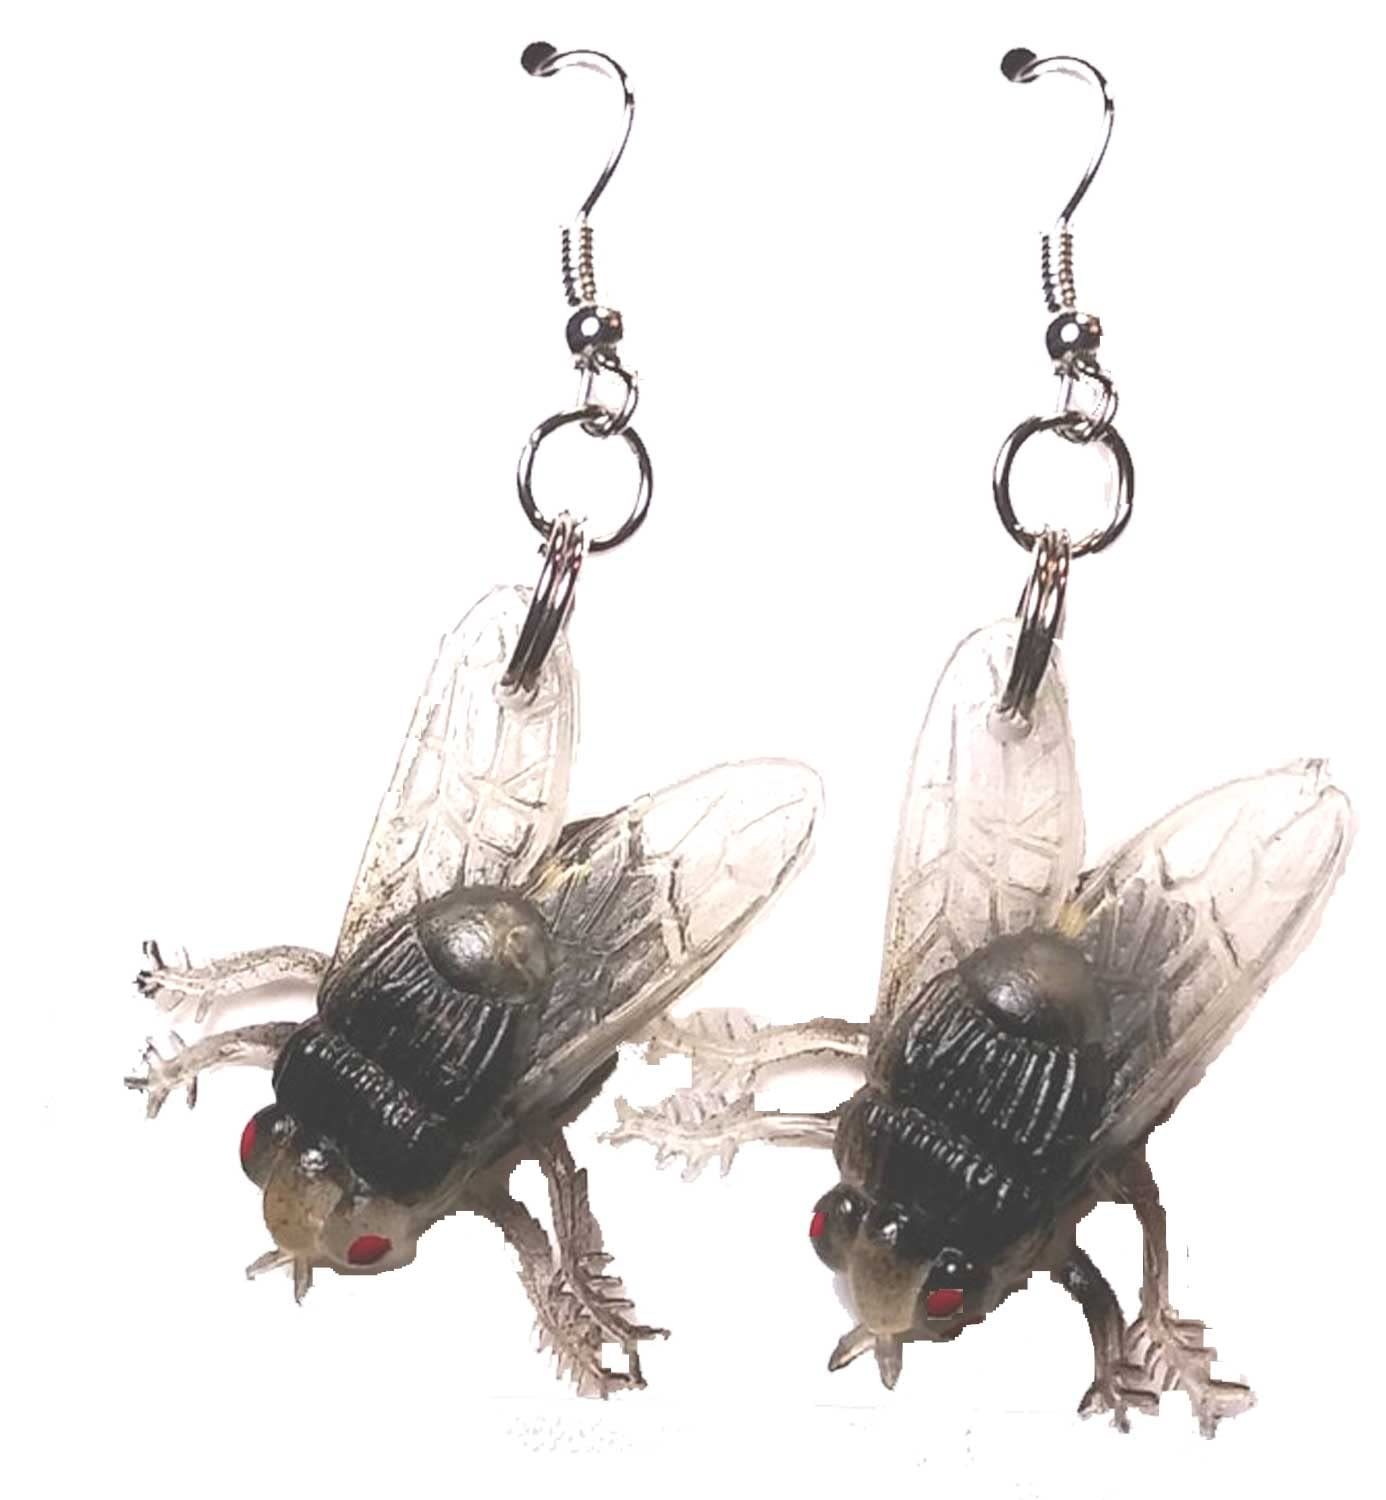 Funky HOUSE FLY FLIES EARRINGS Funny Weird Fishing Camping Garden Bug Insect Gag - $6.90